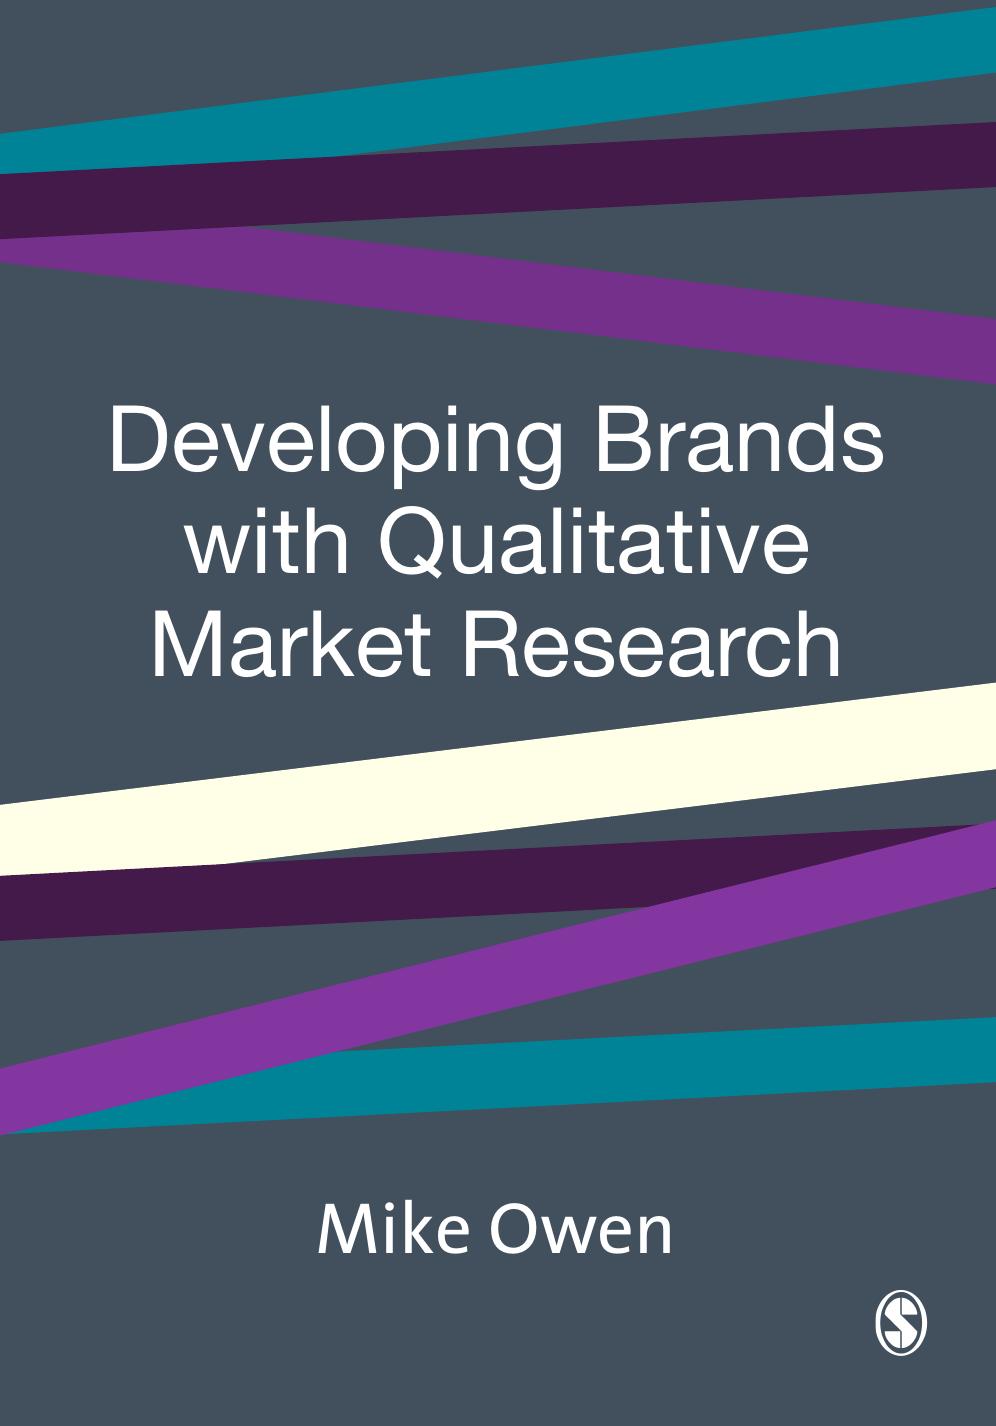 Mike Owen Developing Brands with Qualitative Market Research